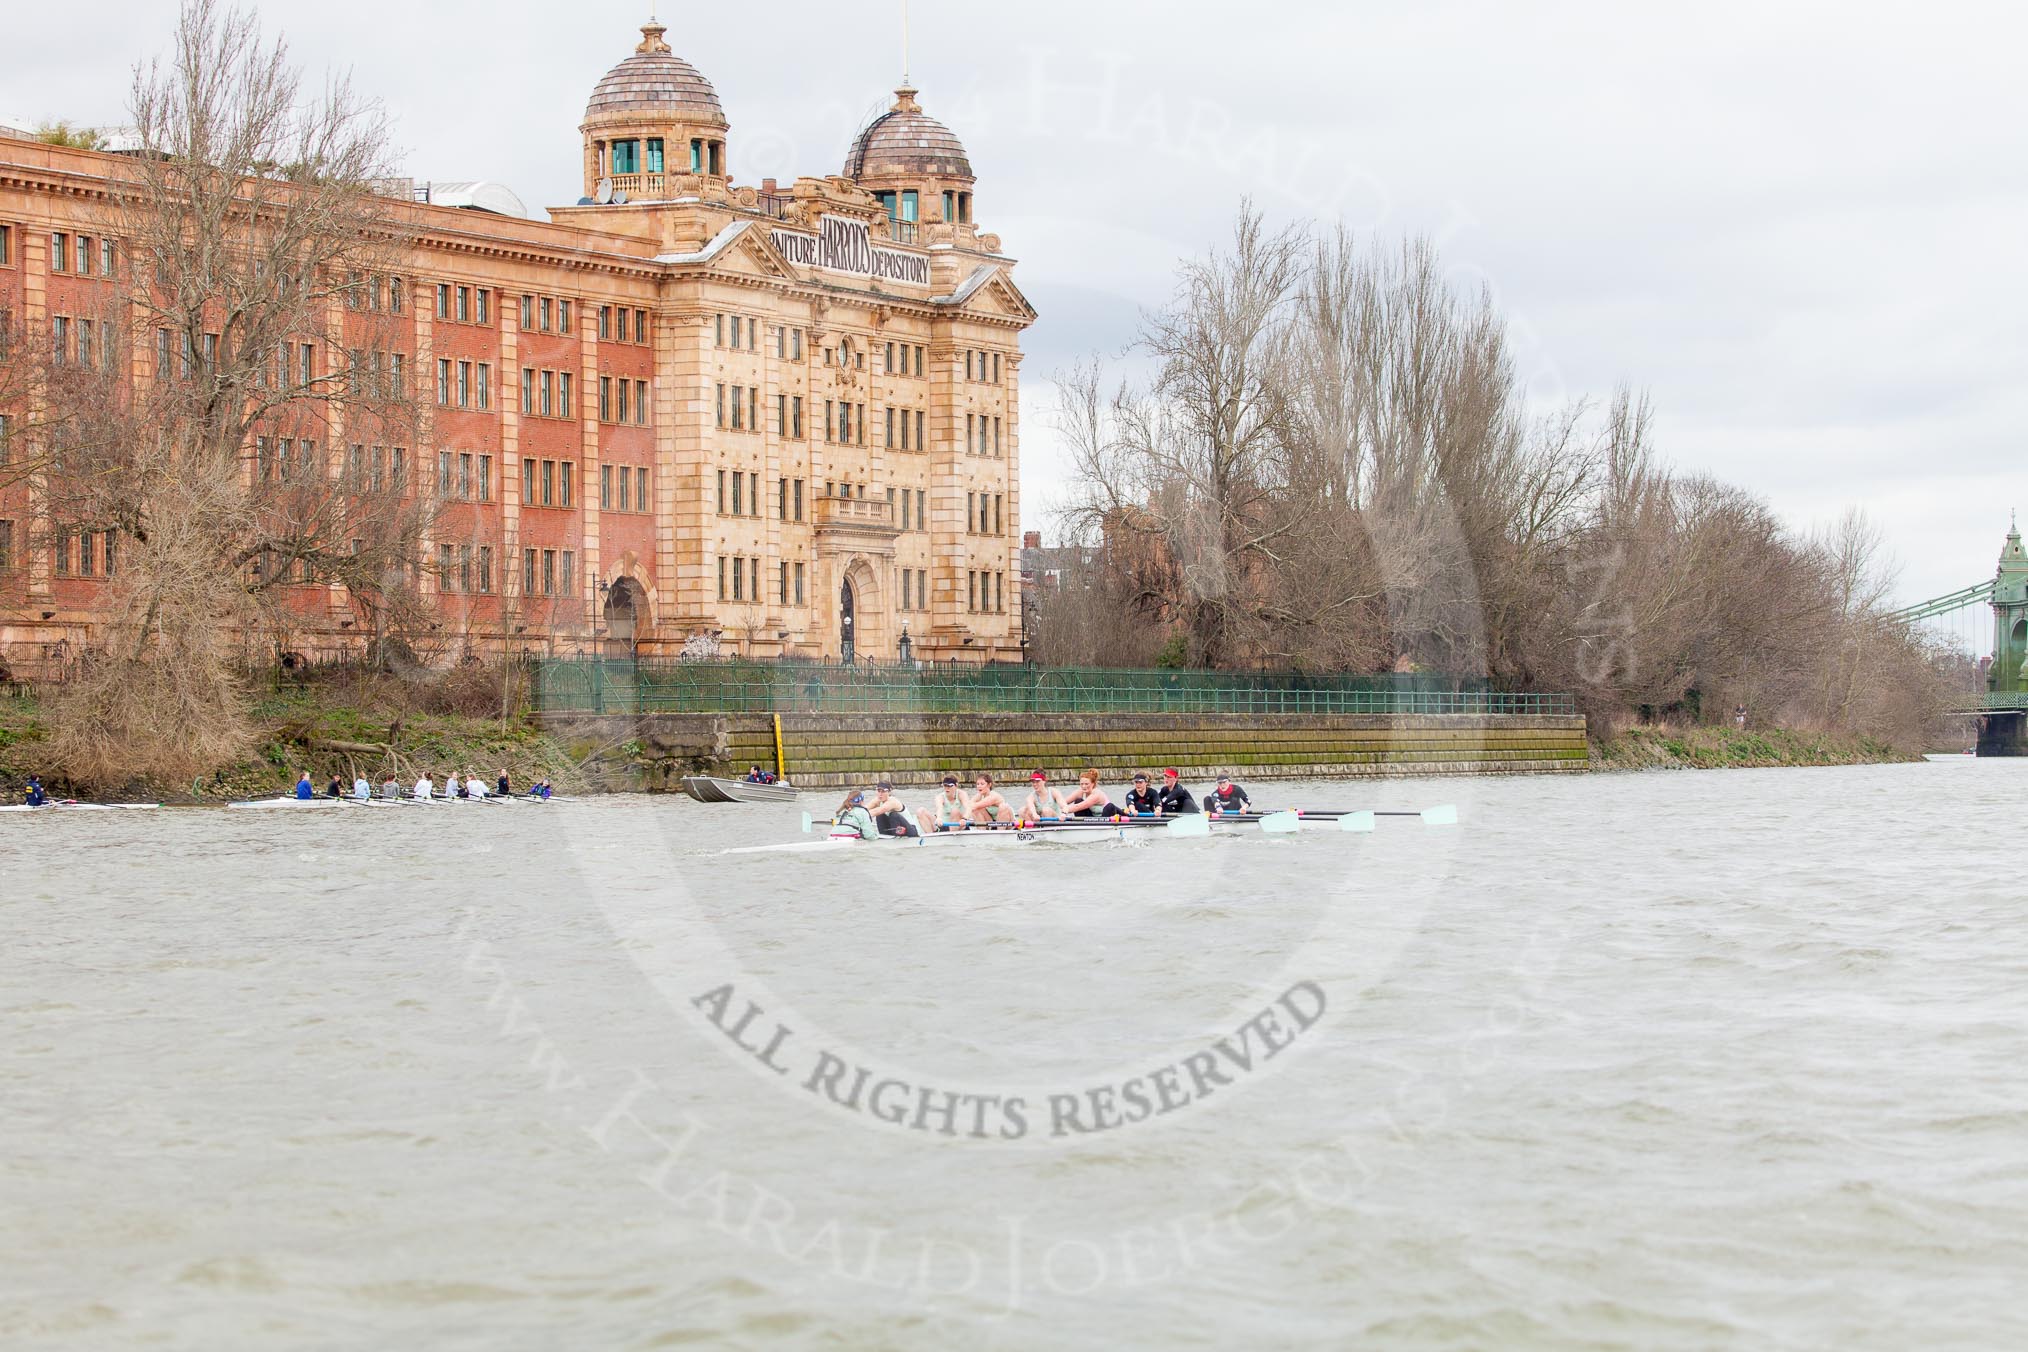 The Boat Race season 2014 - fixture CUWBC vs Thames RC: The Cambridge boat, in the lead over Thames RC, passing the Harrods Depository..




on 02 March 2014 at 13:16, image #113